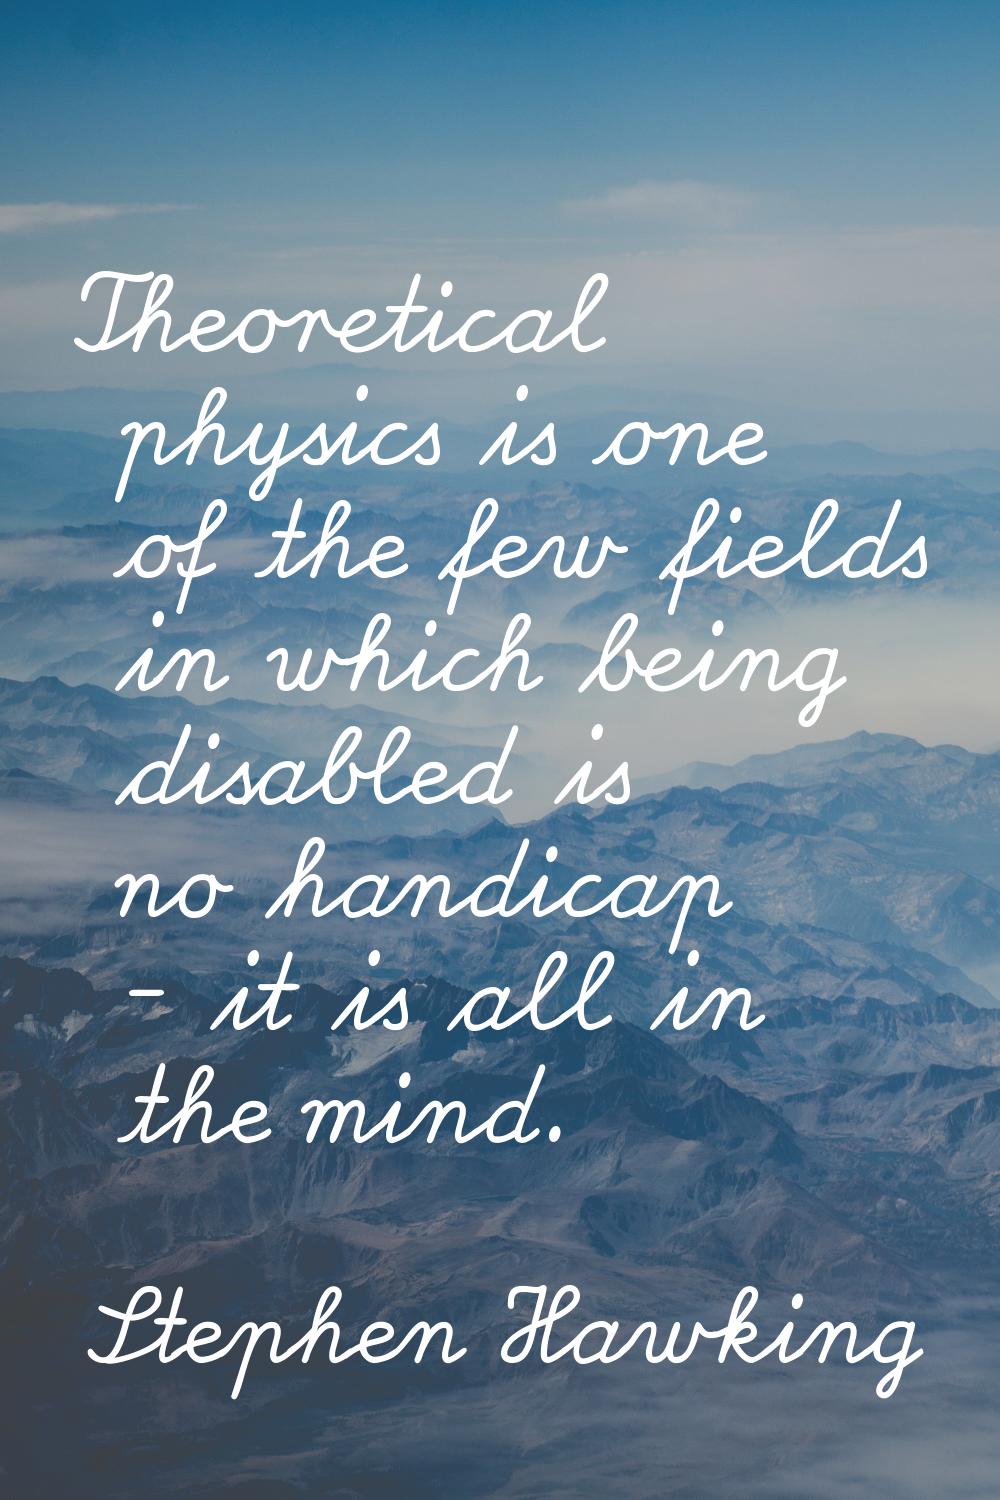 Theoretical physics is one of the few fields in which being disabled is no handicap - it is all in 